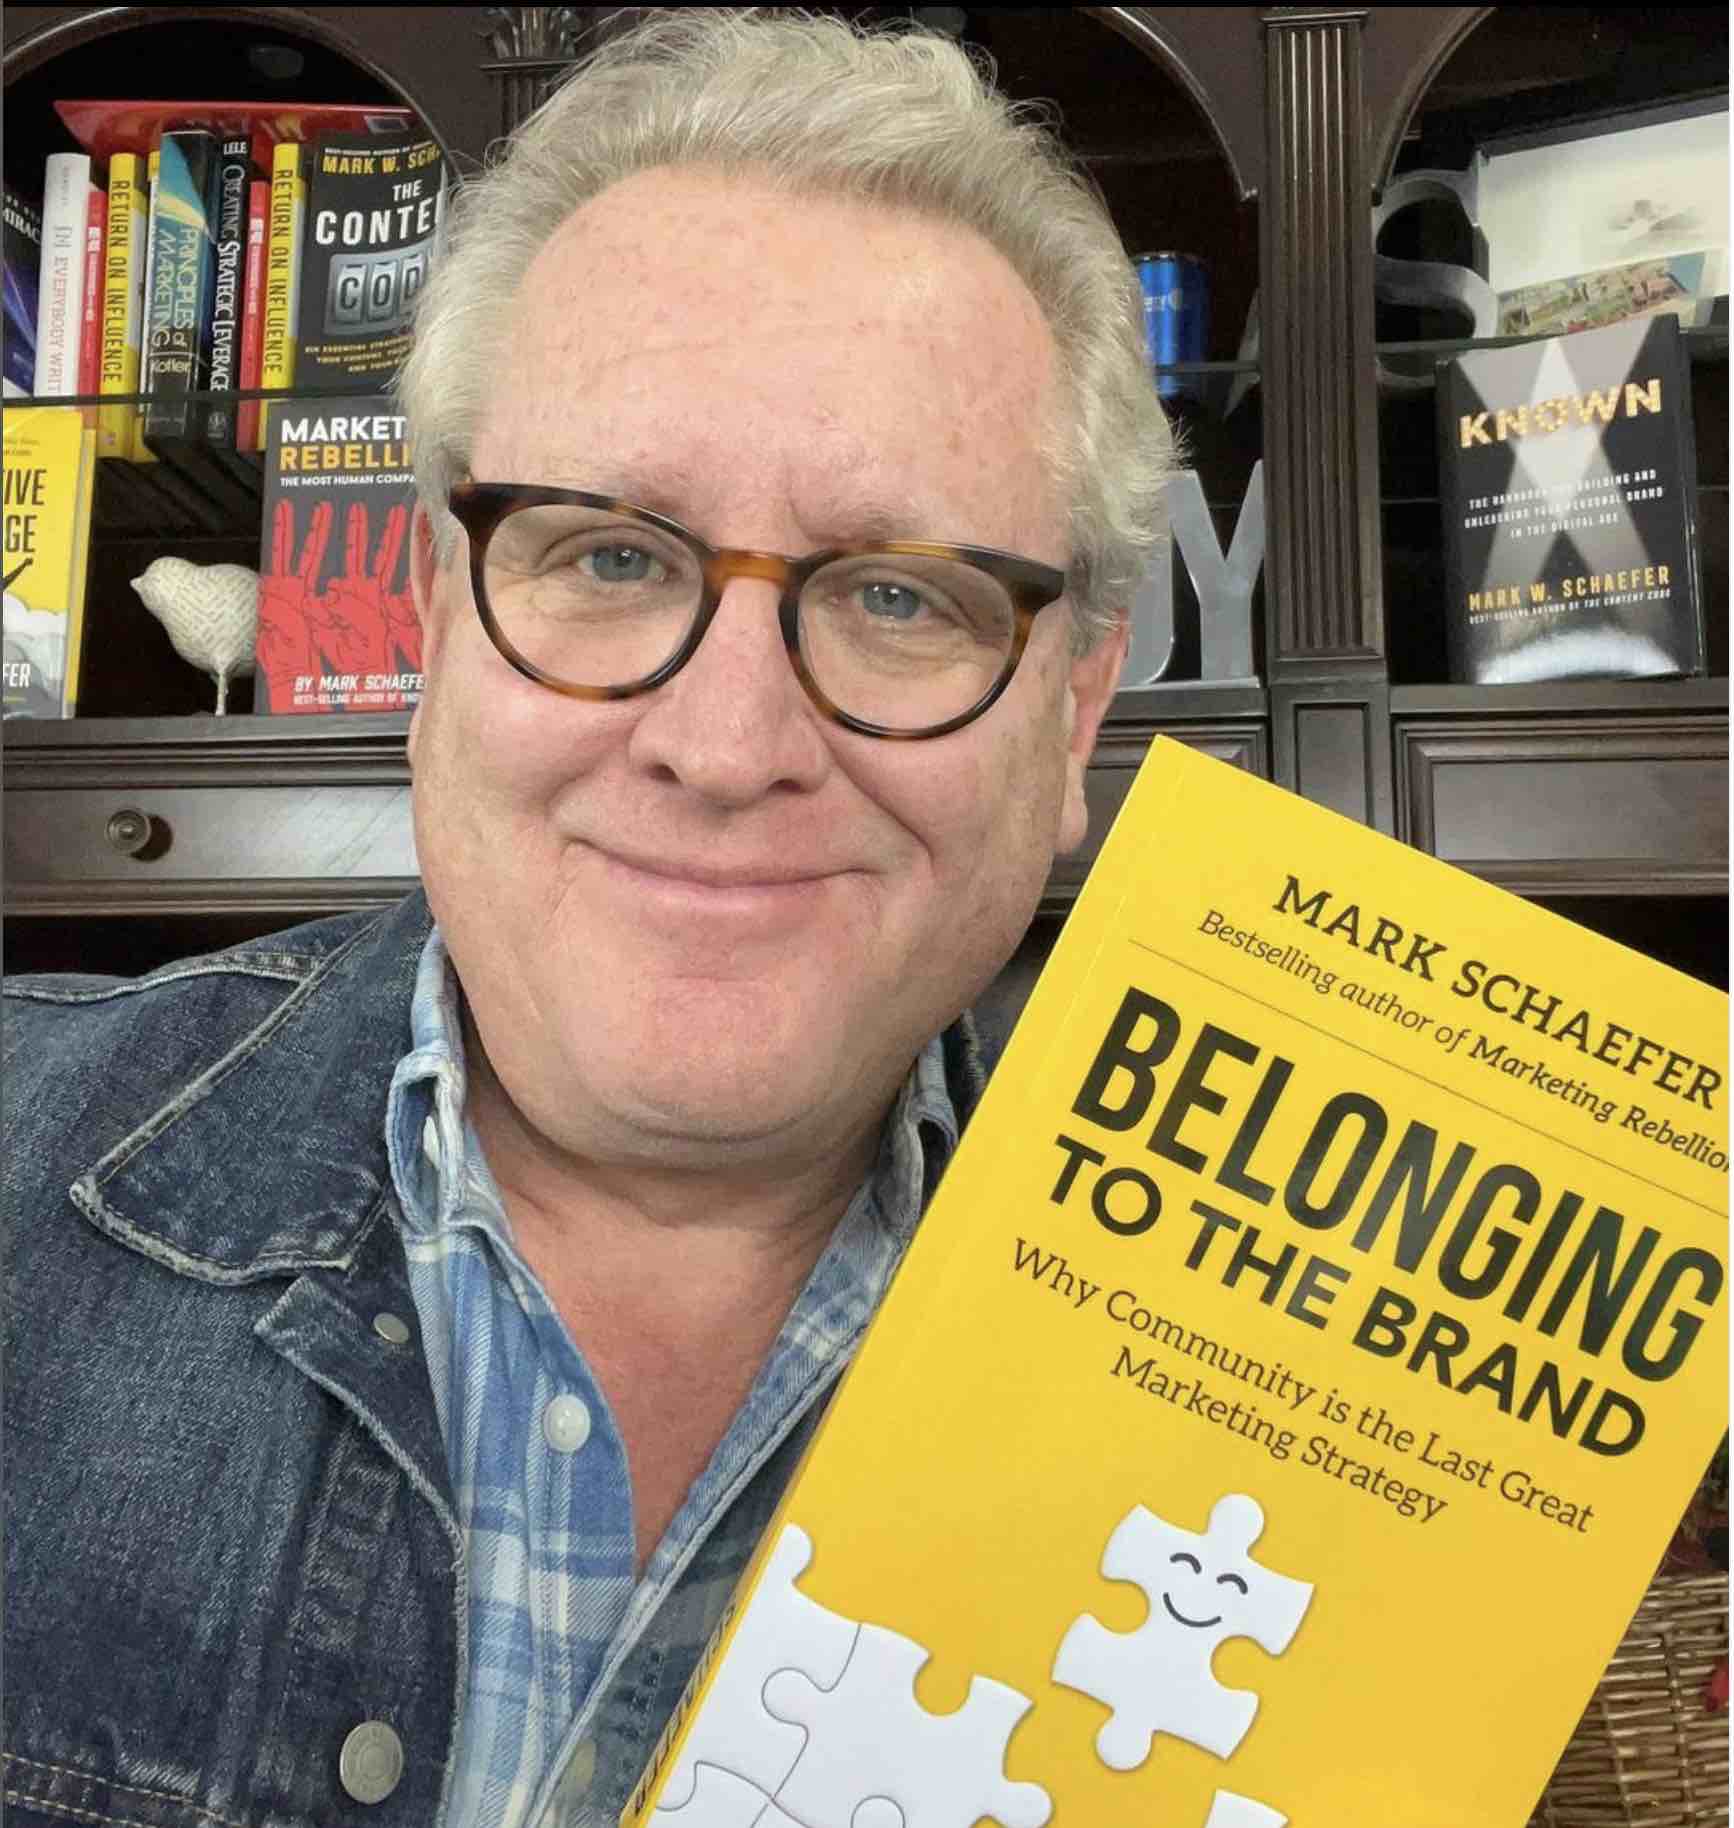 Today's guest is Mark Schaefer. We talk about his newest book: “Belonging to the Brand: Why Community is the Last Great Marketing Strategy.” 